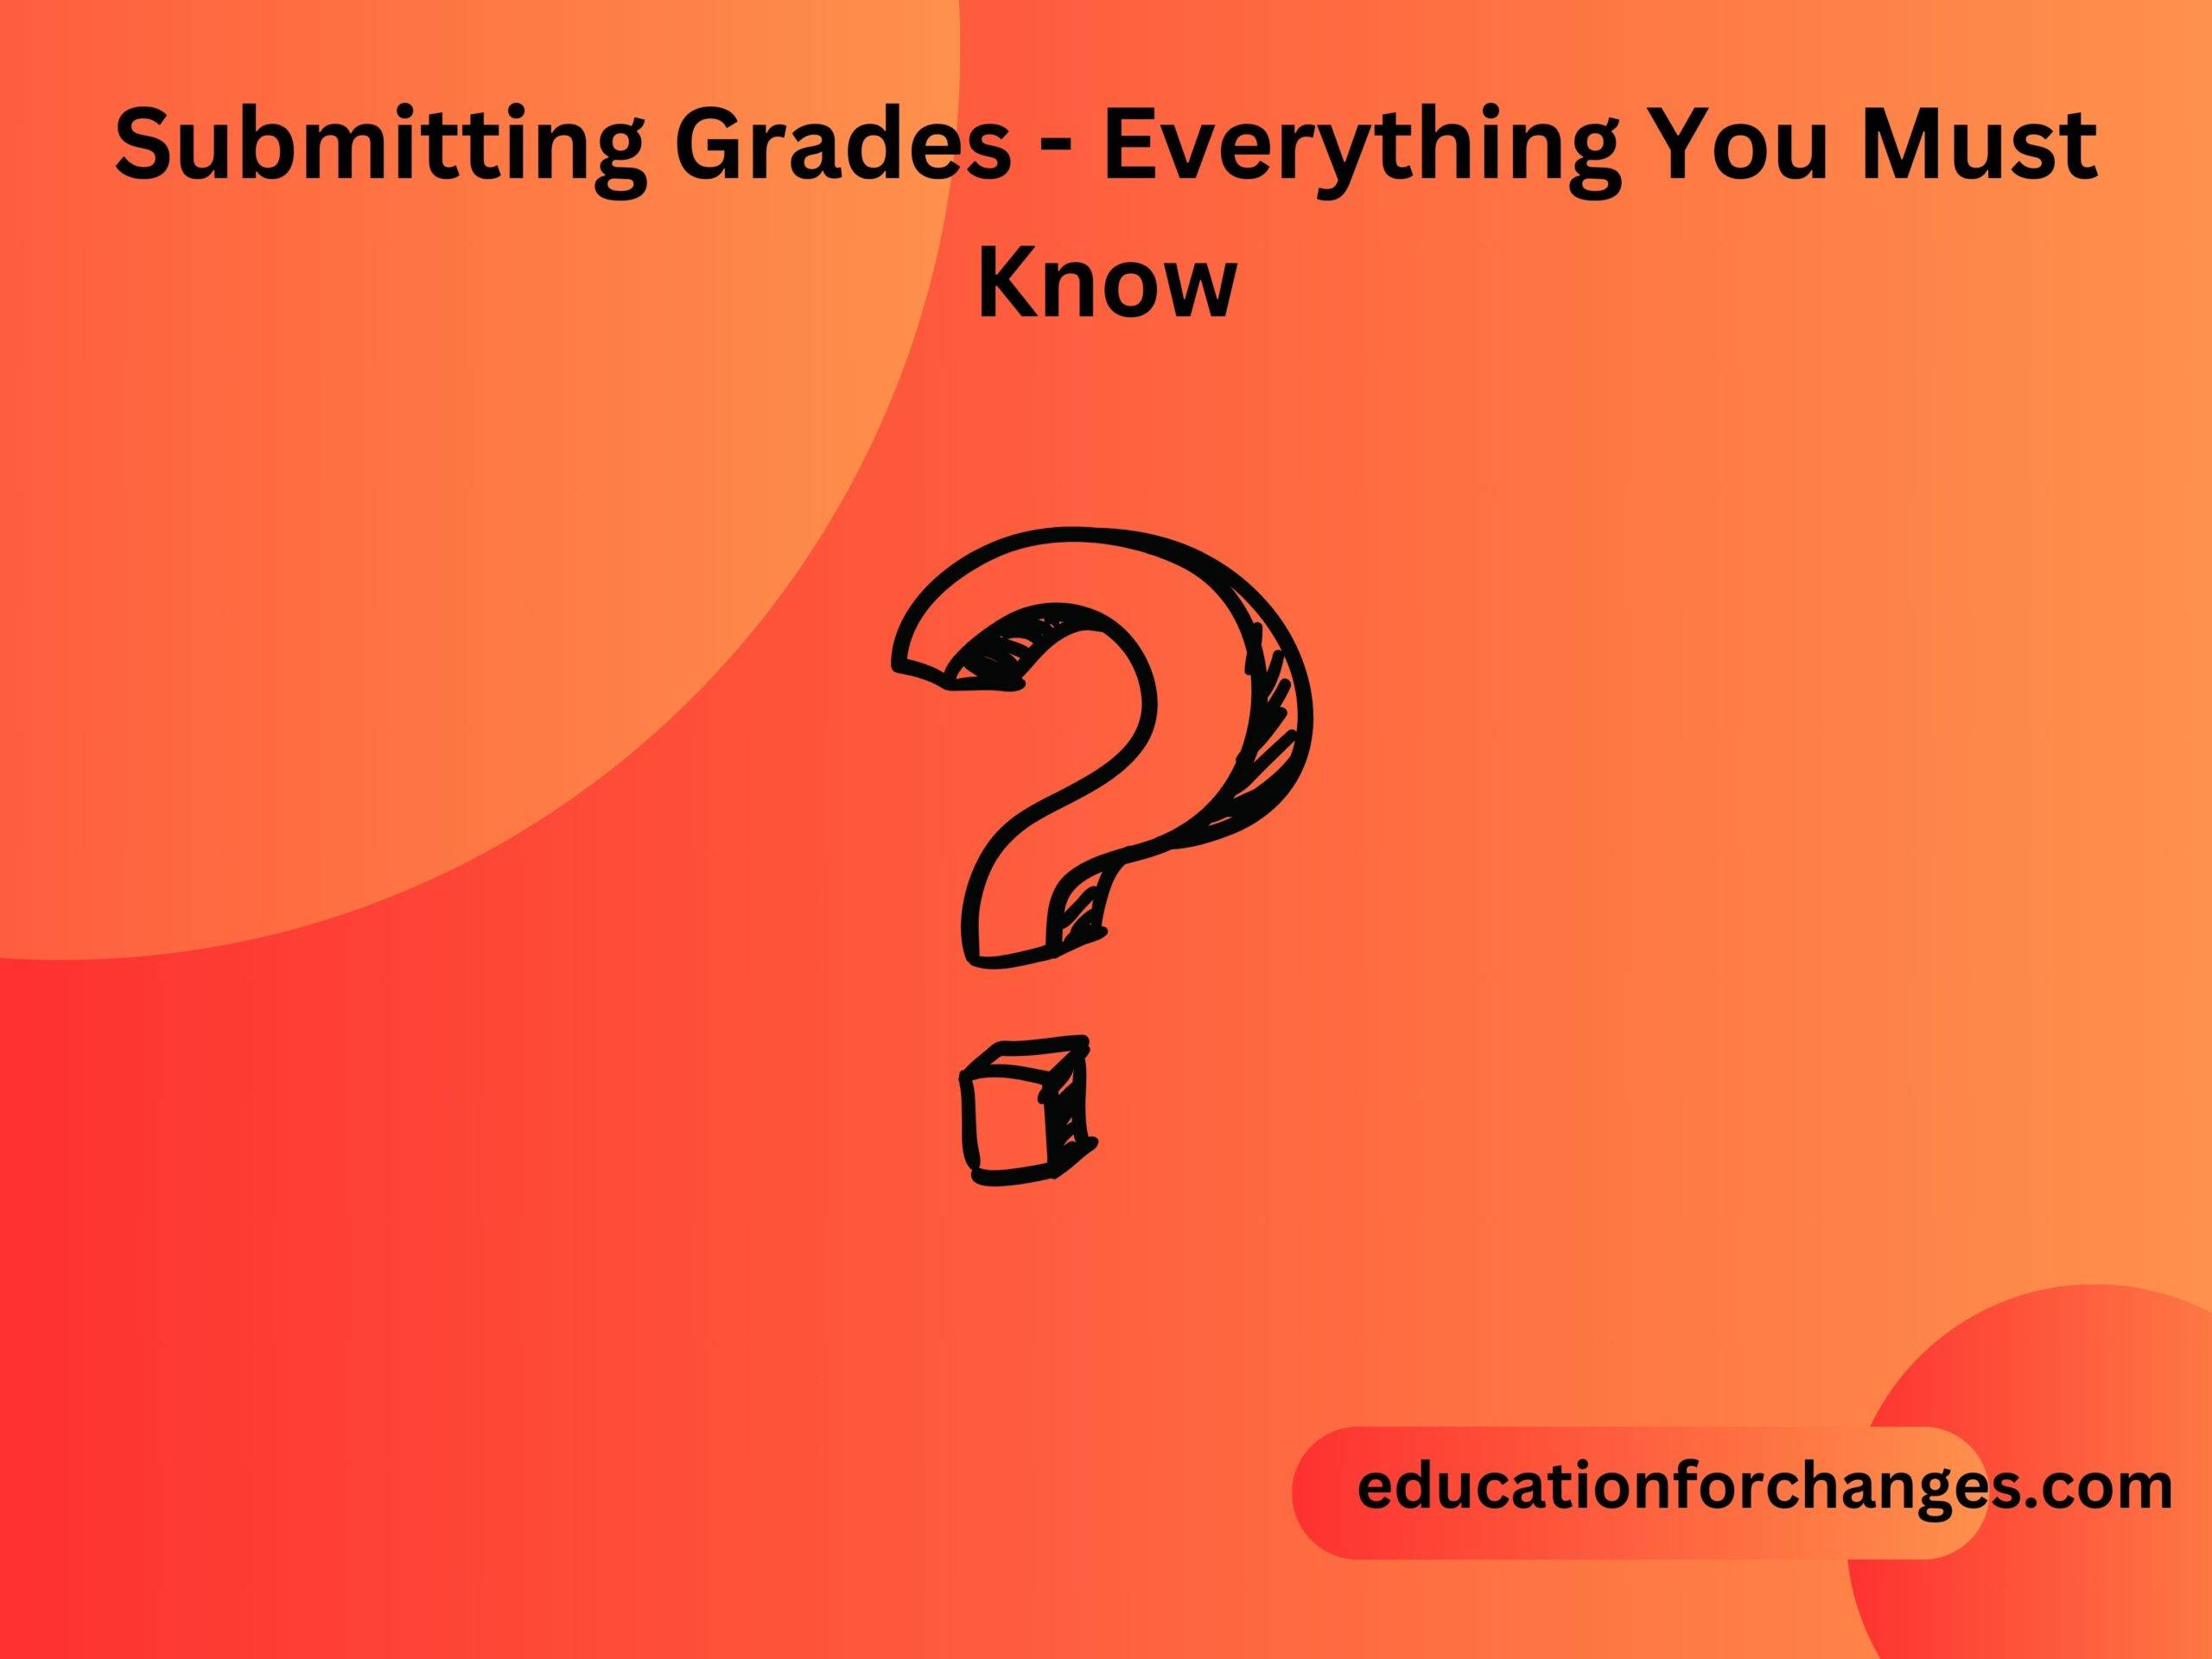 Submitting Grades - Everything You Must Know